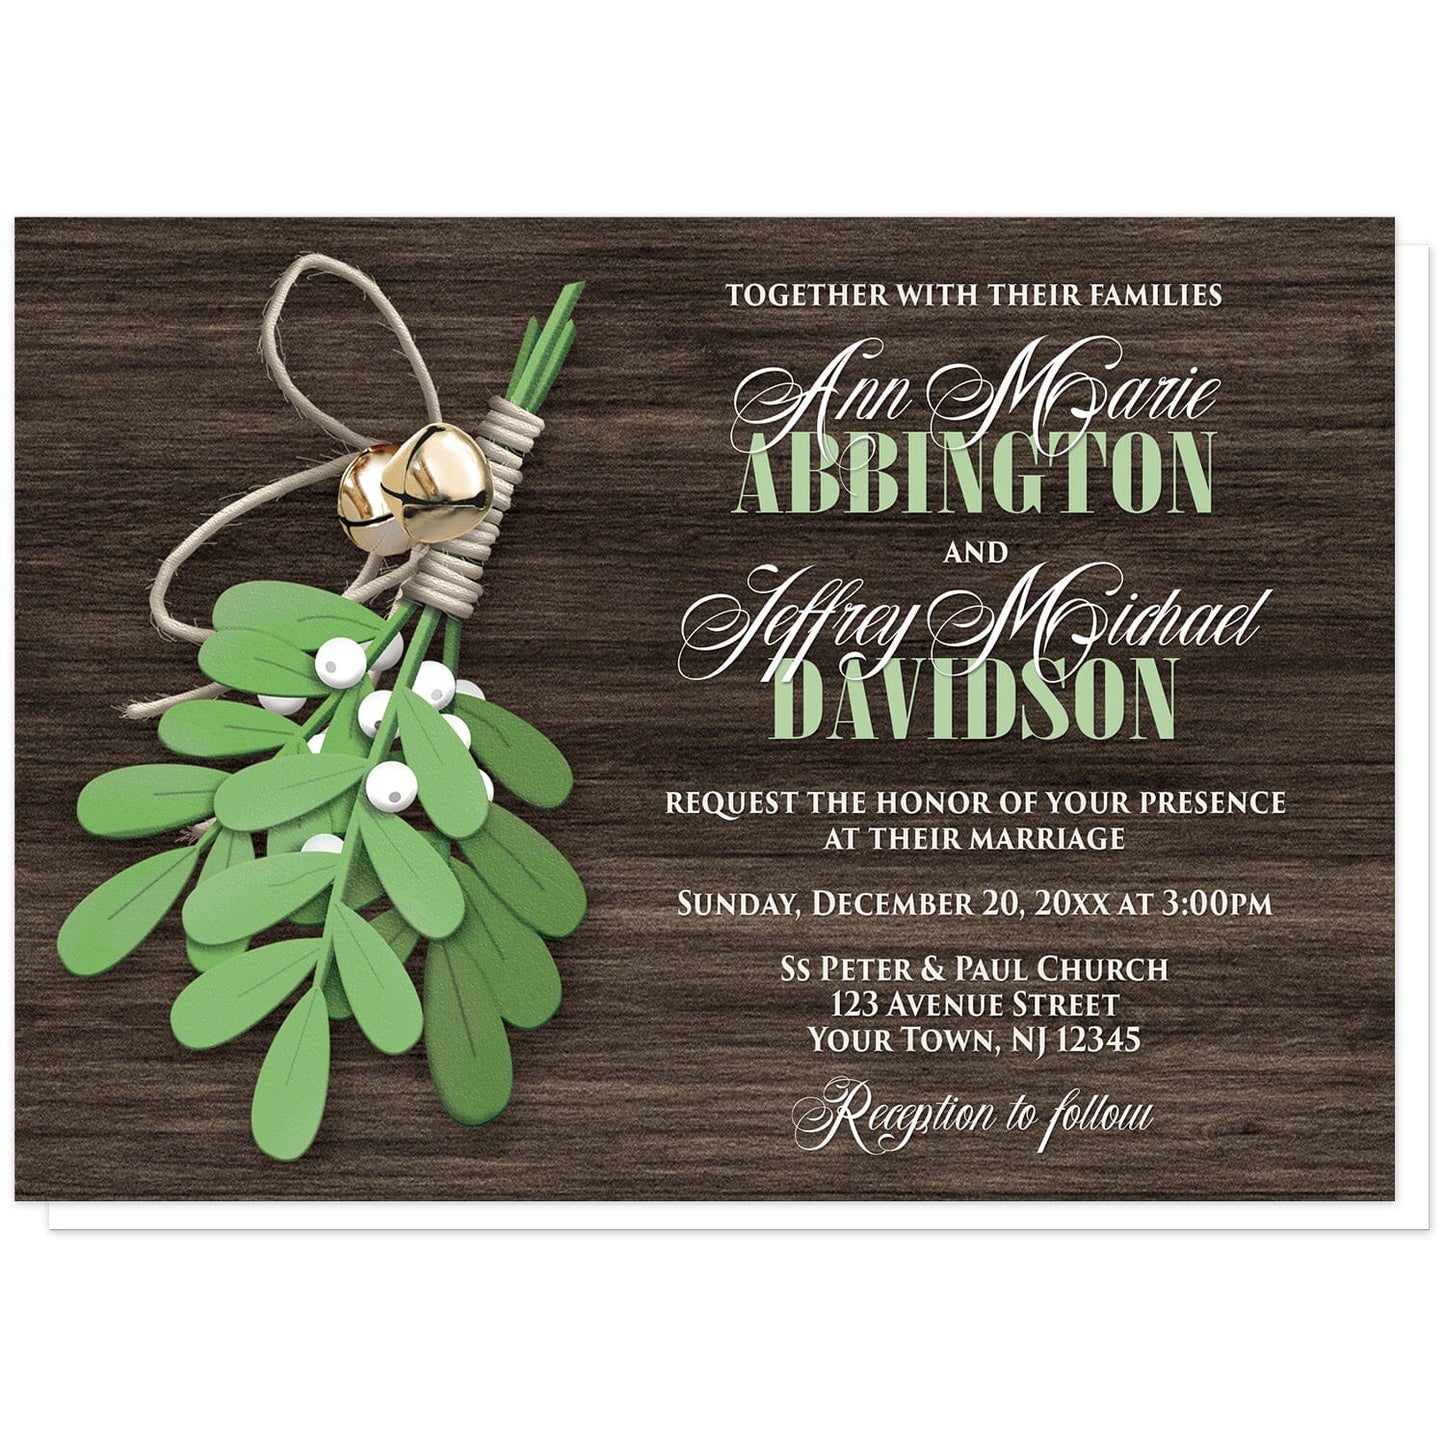 Rustic Mistletoe and Wood Wedding Invitations at Artistically Invited. Country-inspired rustic mistletoe and wood wedding invitations with an illustrated mistletoe plant tied together with twine and jingle bells over a dark brown wood background. Your personalized marriage celebration details are custom printed in white and green over the wood design to the right of the mistletoe. 